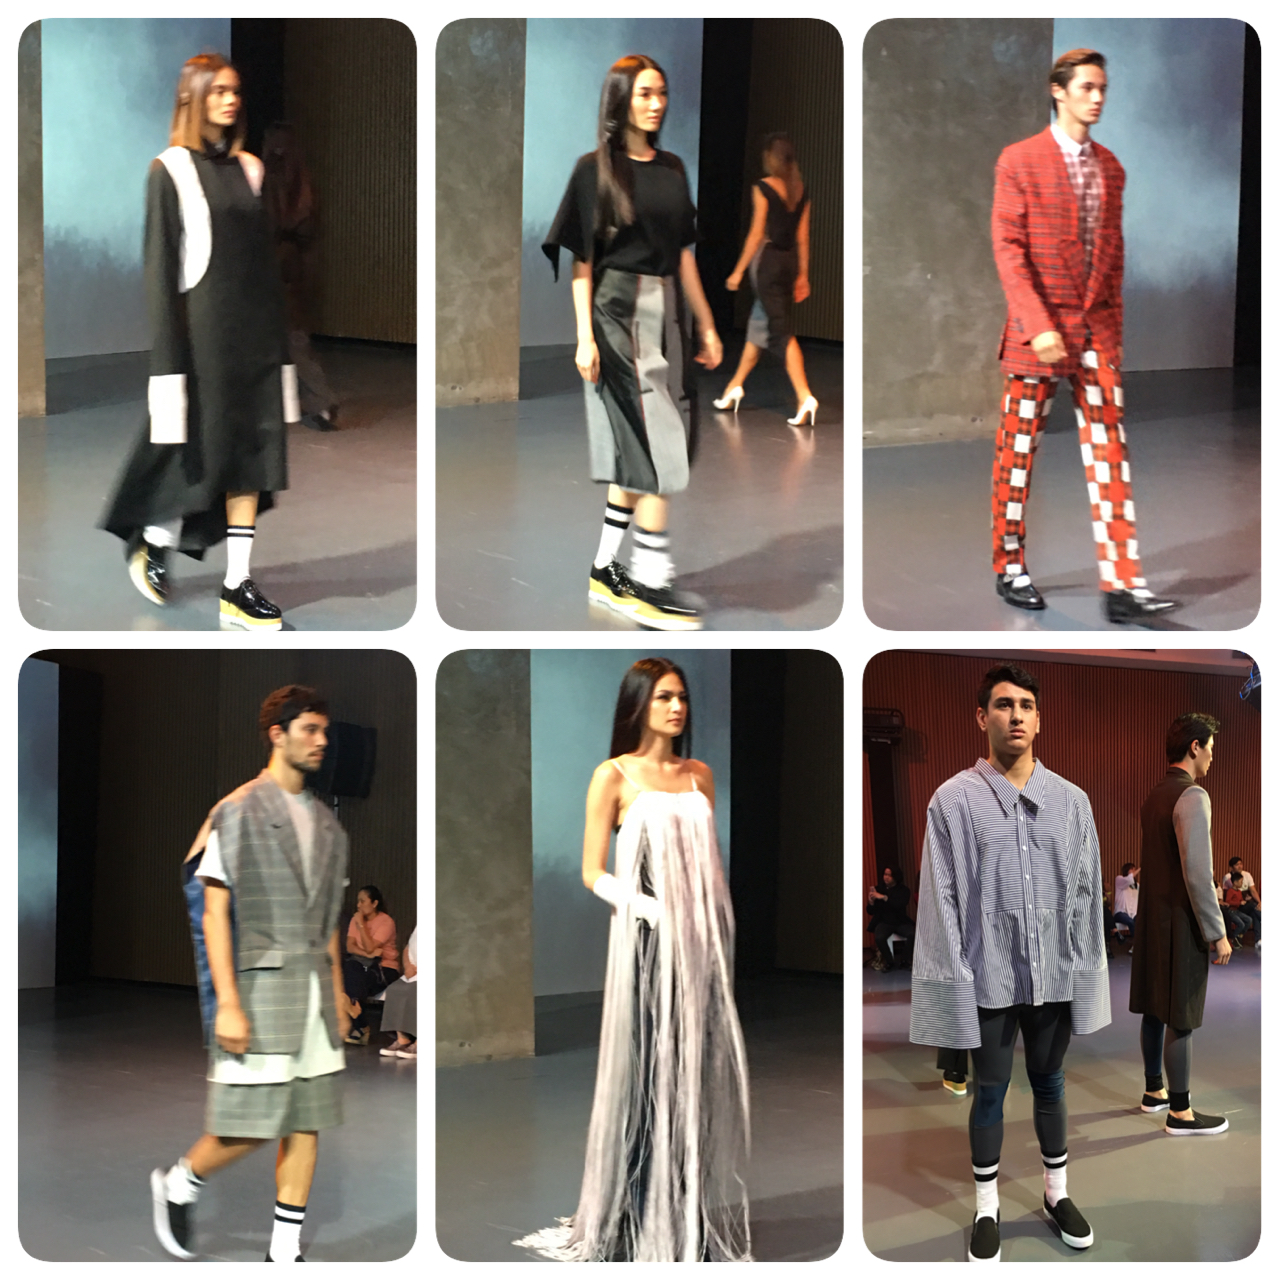 Joey Samson explores new approaches to tailoring at Bench Fashion Week